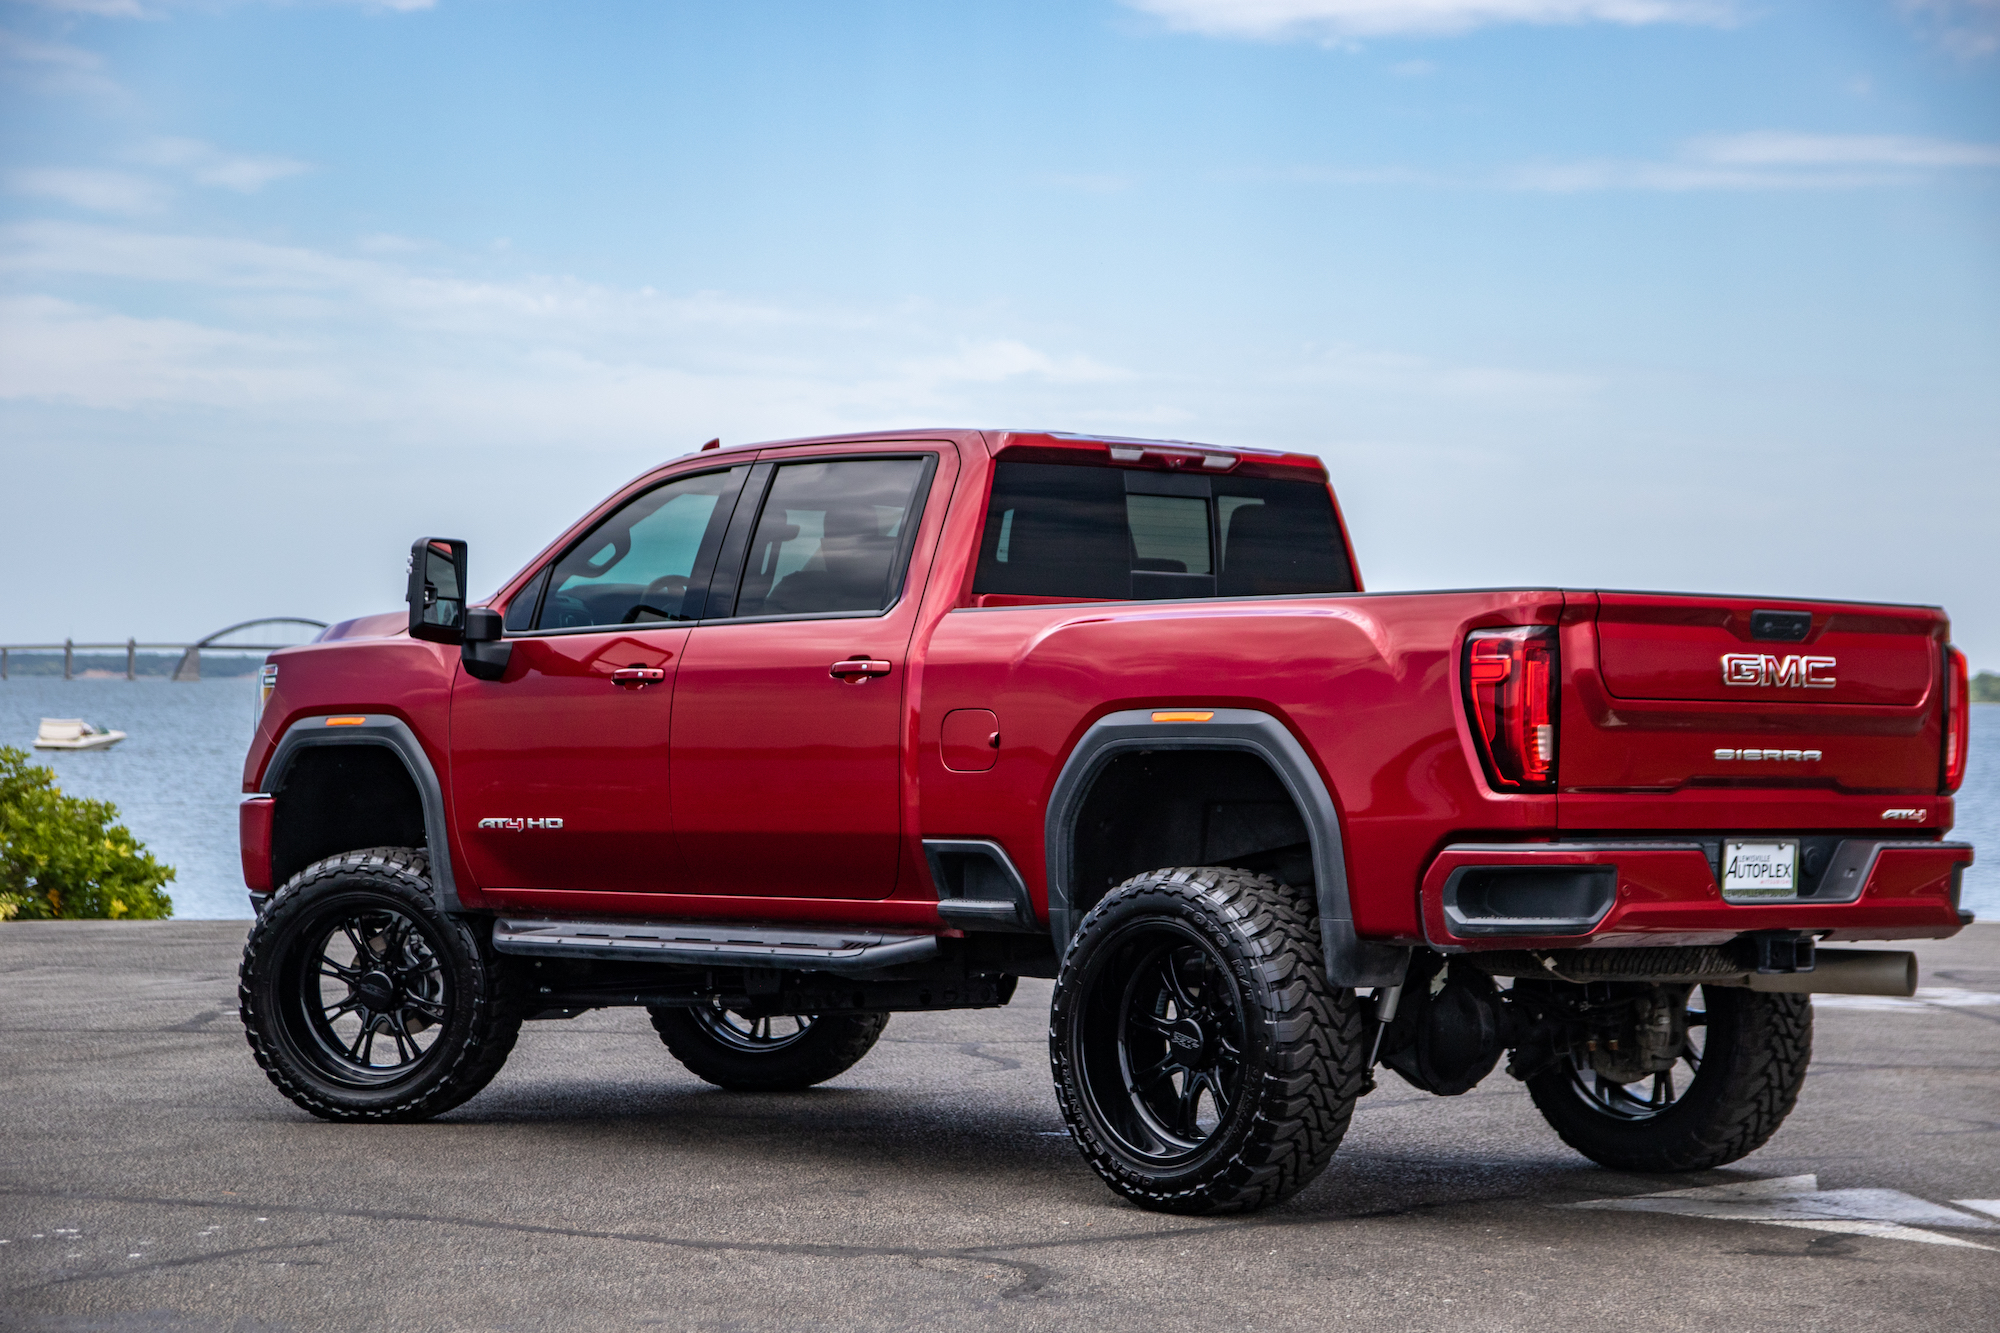 2020 Gmc Sierra 2500hd At4 On 24x12 Jtx Forged Wheels Jtx Forged